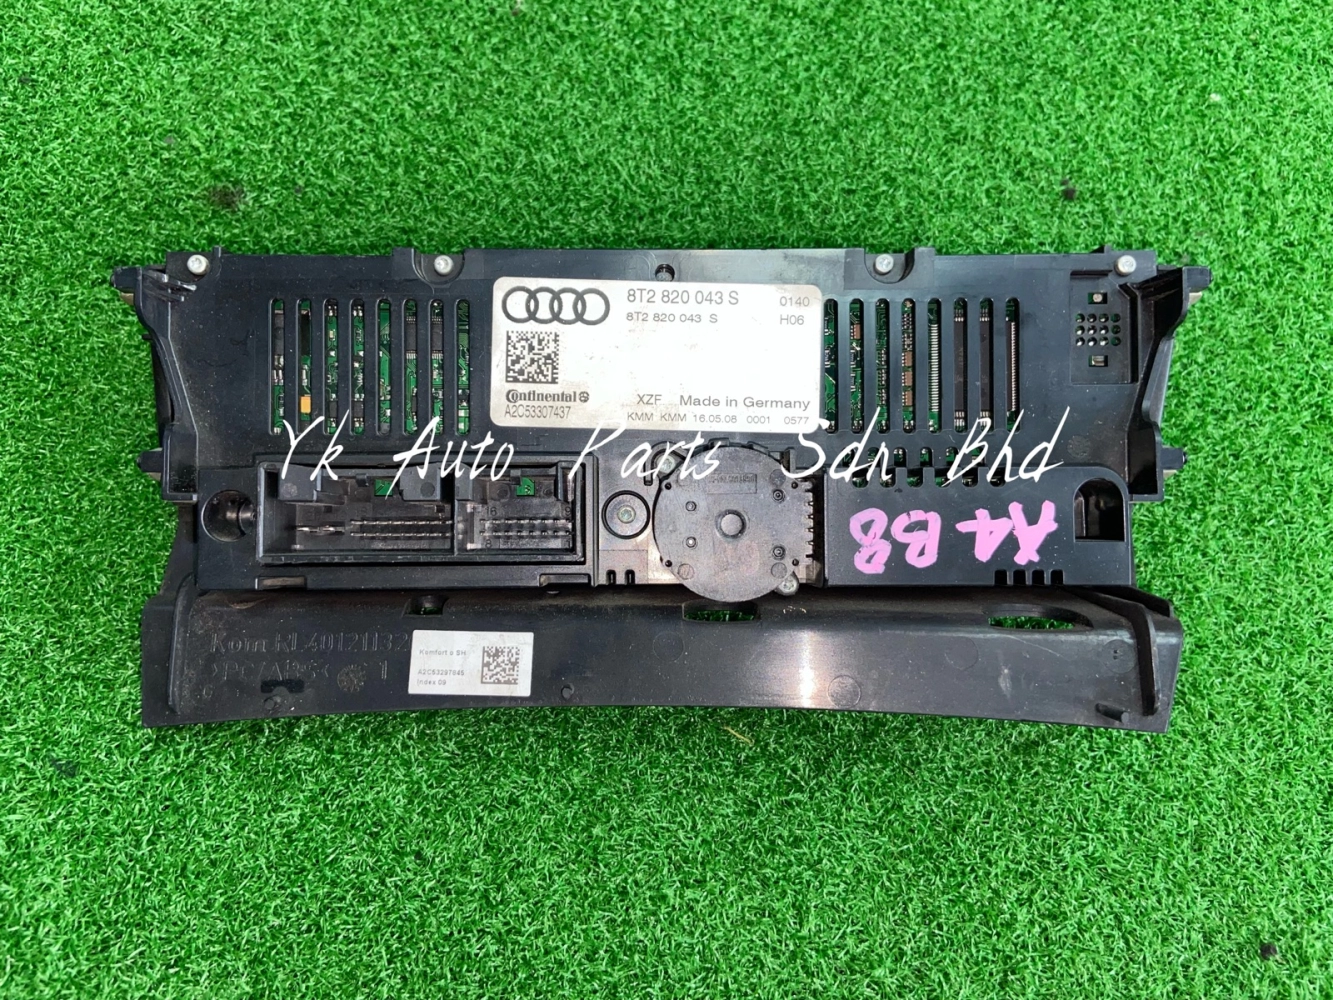 Audi A4 B8 Air Cond Switch 8T2 820 043 S Used